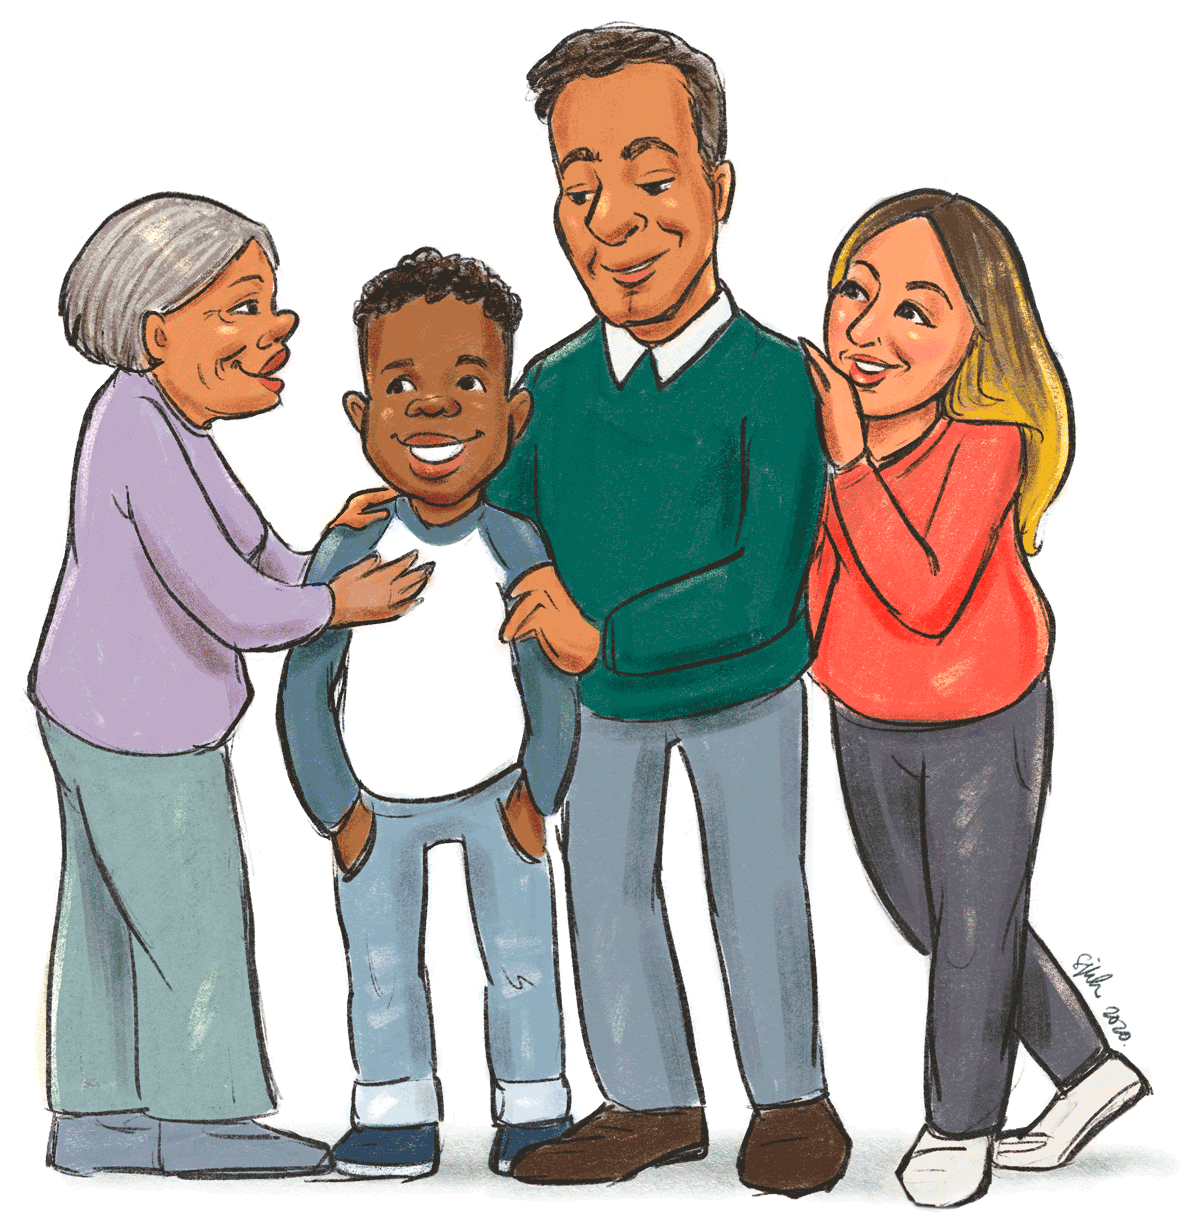 illustration of a family who looks brown or latinx gathered around a black tween boy everyone smiling and looking caring